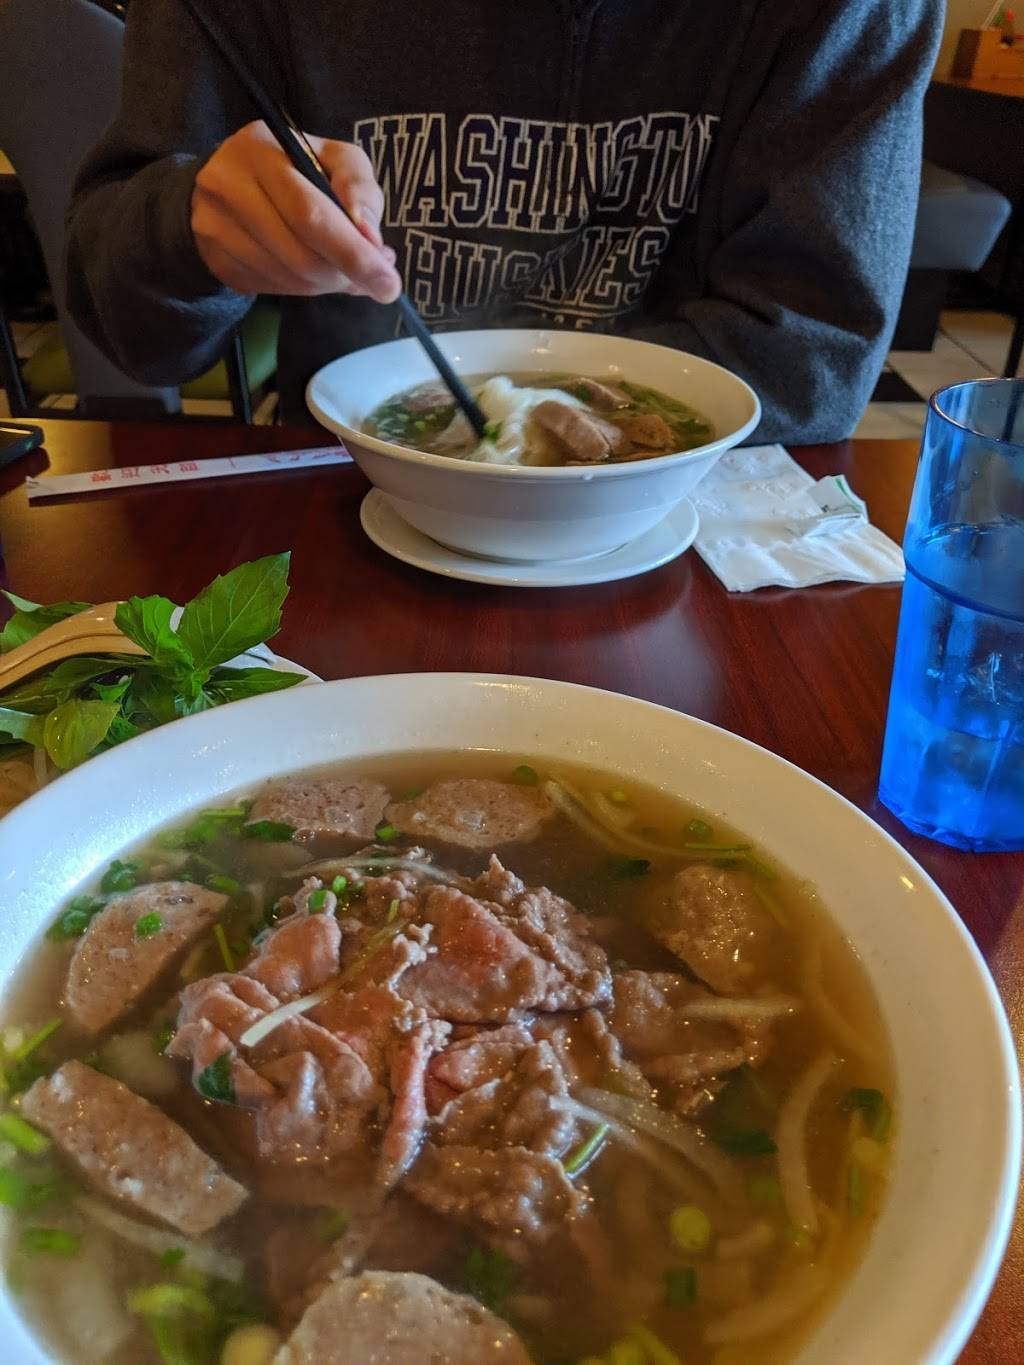 Pho 175 | restaurant | 13317 NE 175th St suite m, Woodinville, WA 98072, USA | 4254869699 OR +1 425-486-9699